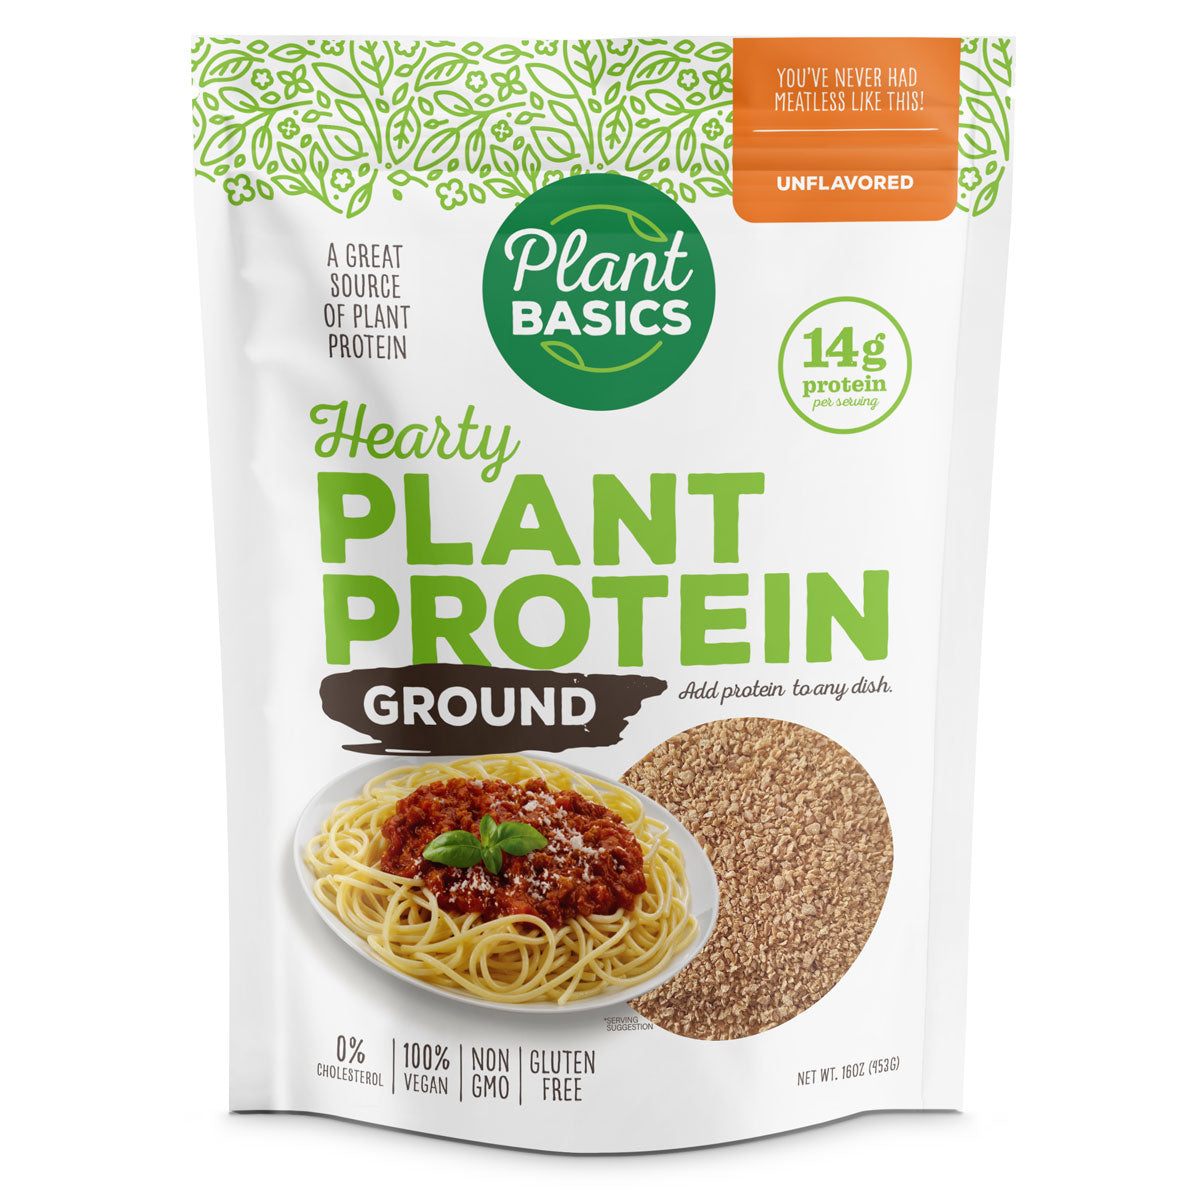 Hearty Plant Protein - Unflavored Ground